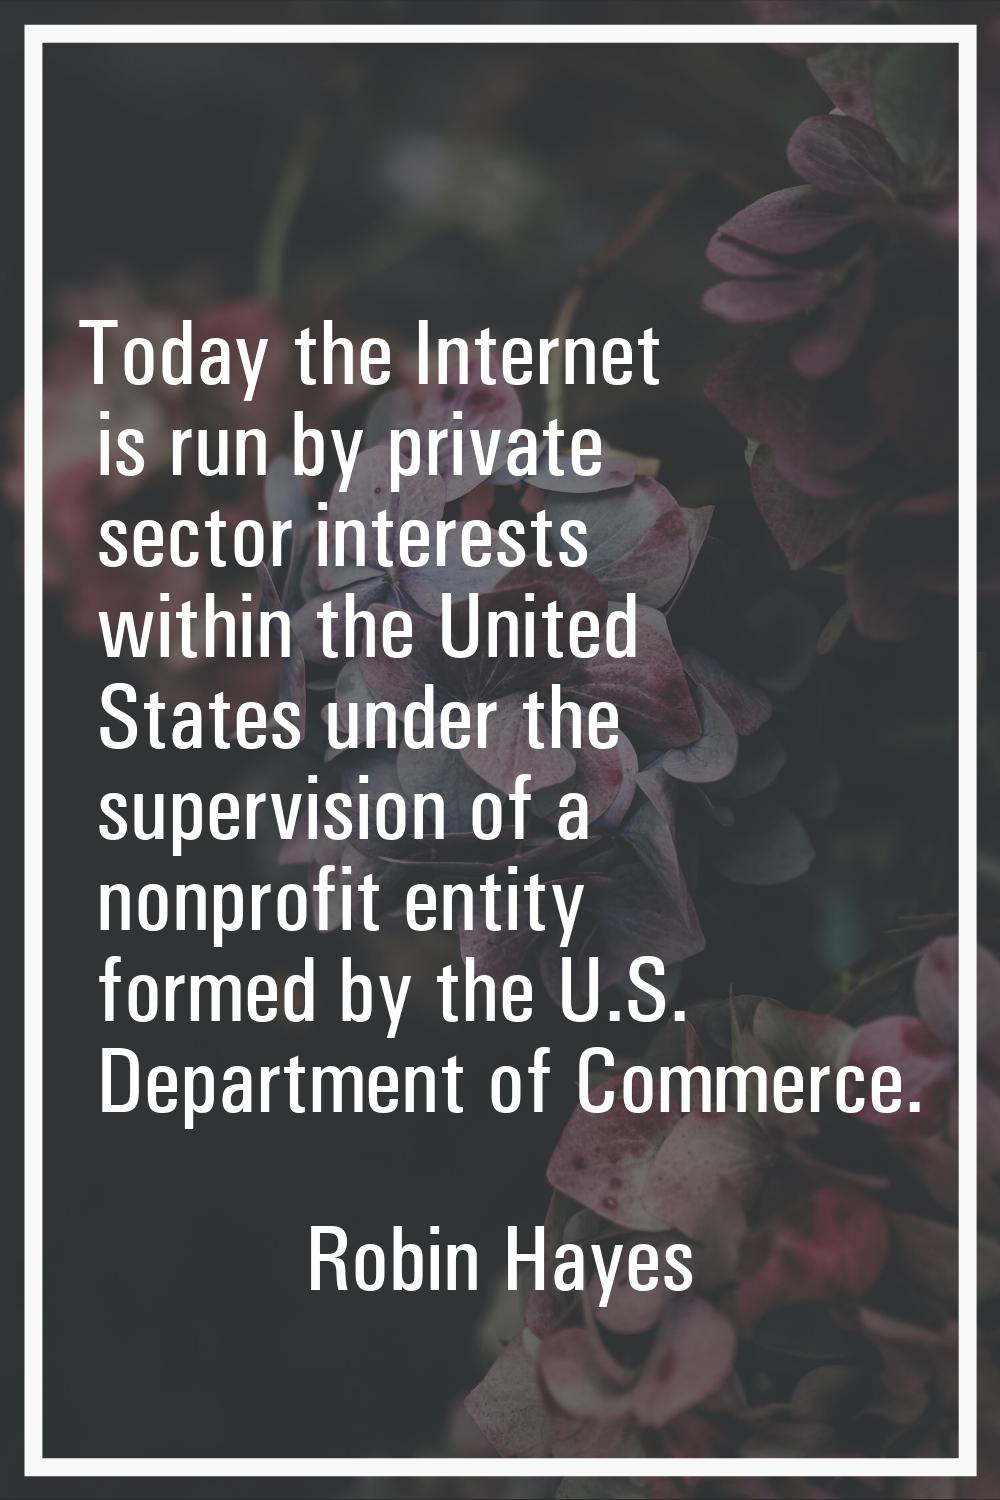 Today the Internet is run by private sector interests within the United States under the supervisio